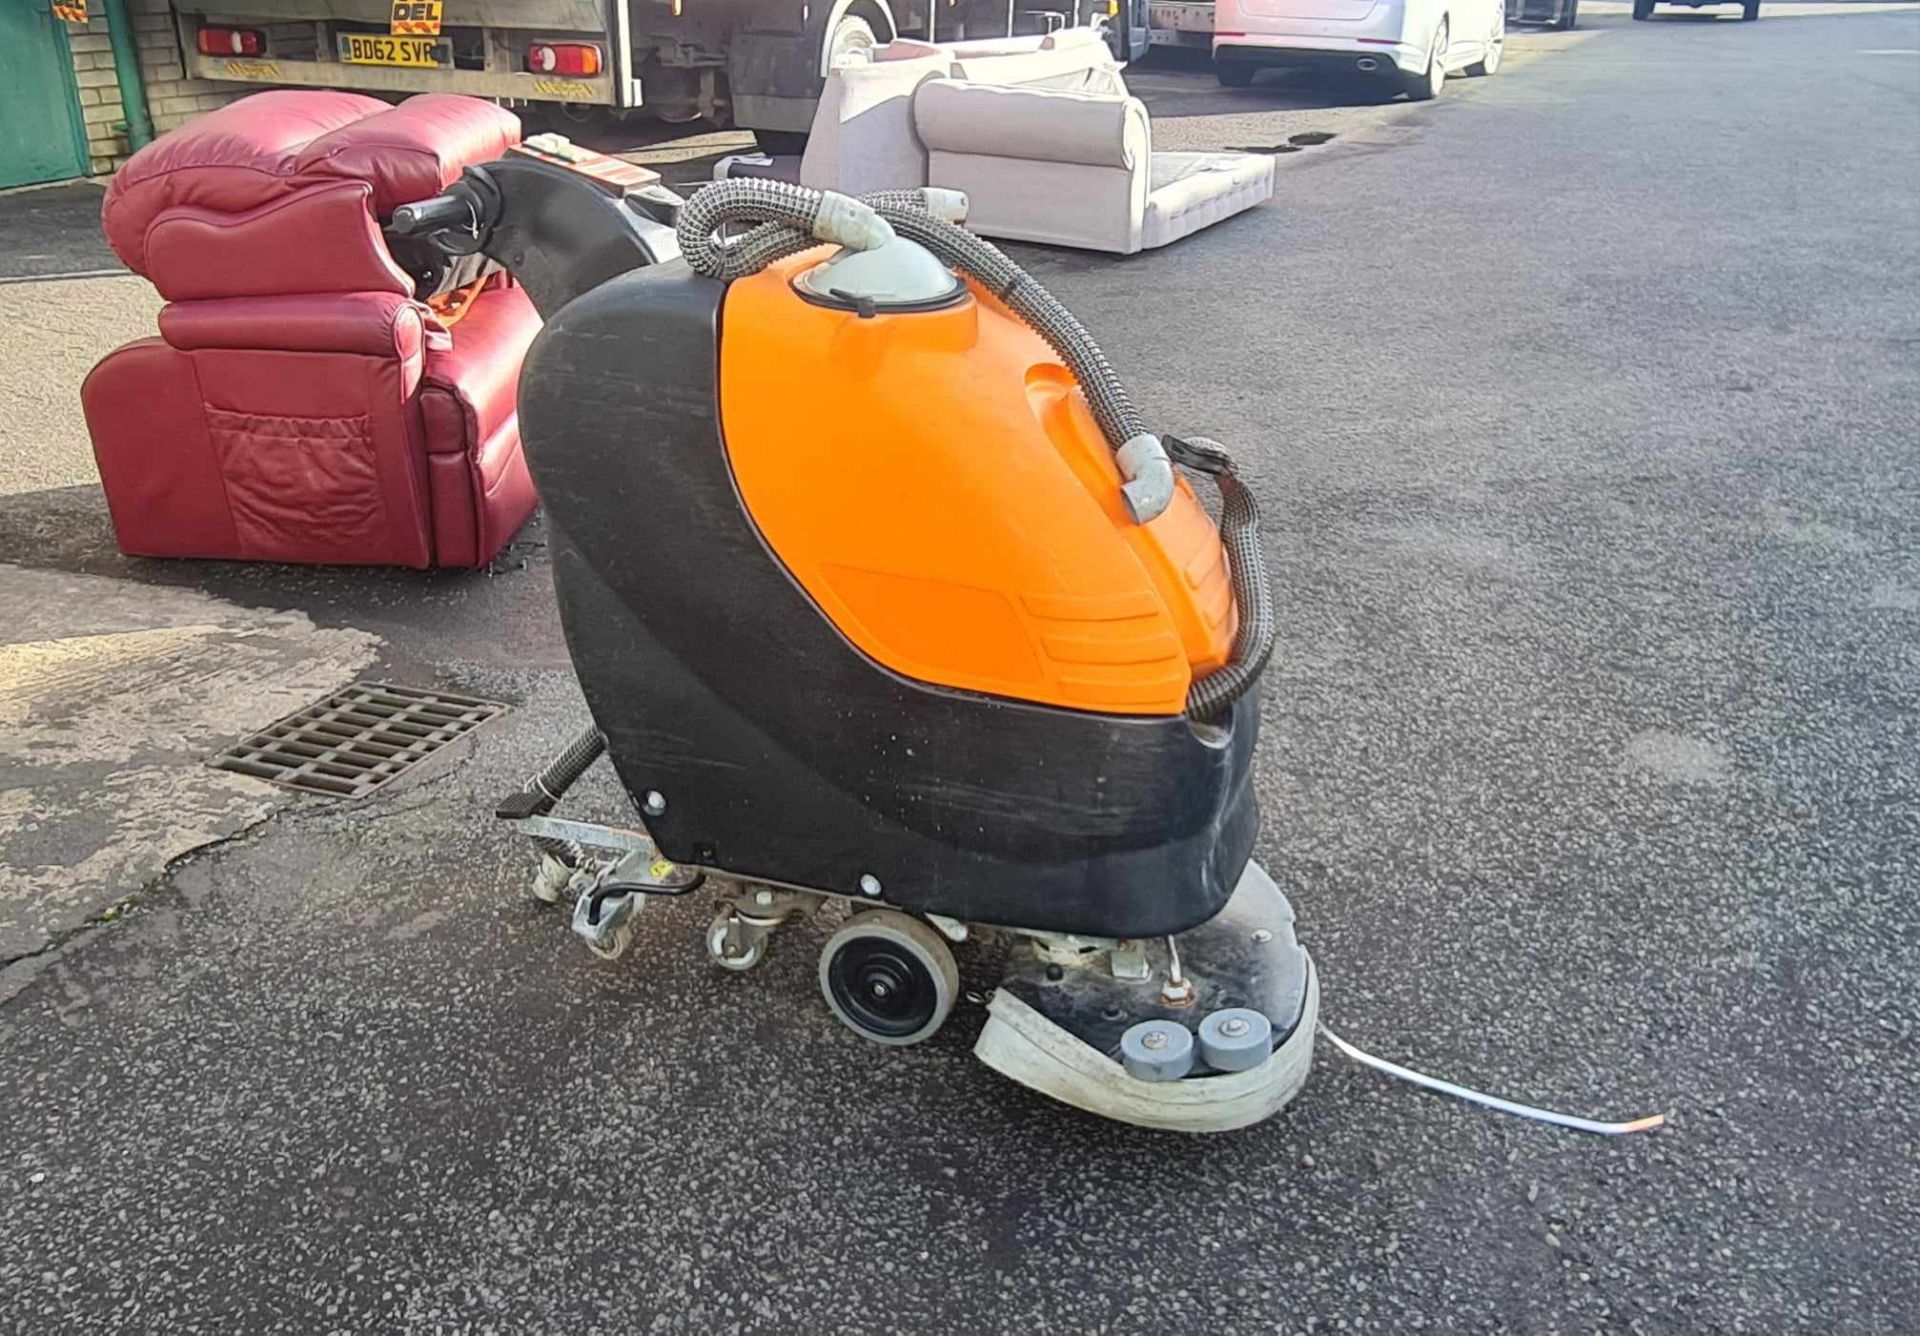 Professional Floor Cleaning Machine For Spares Or Repair